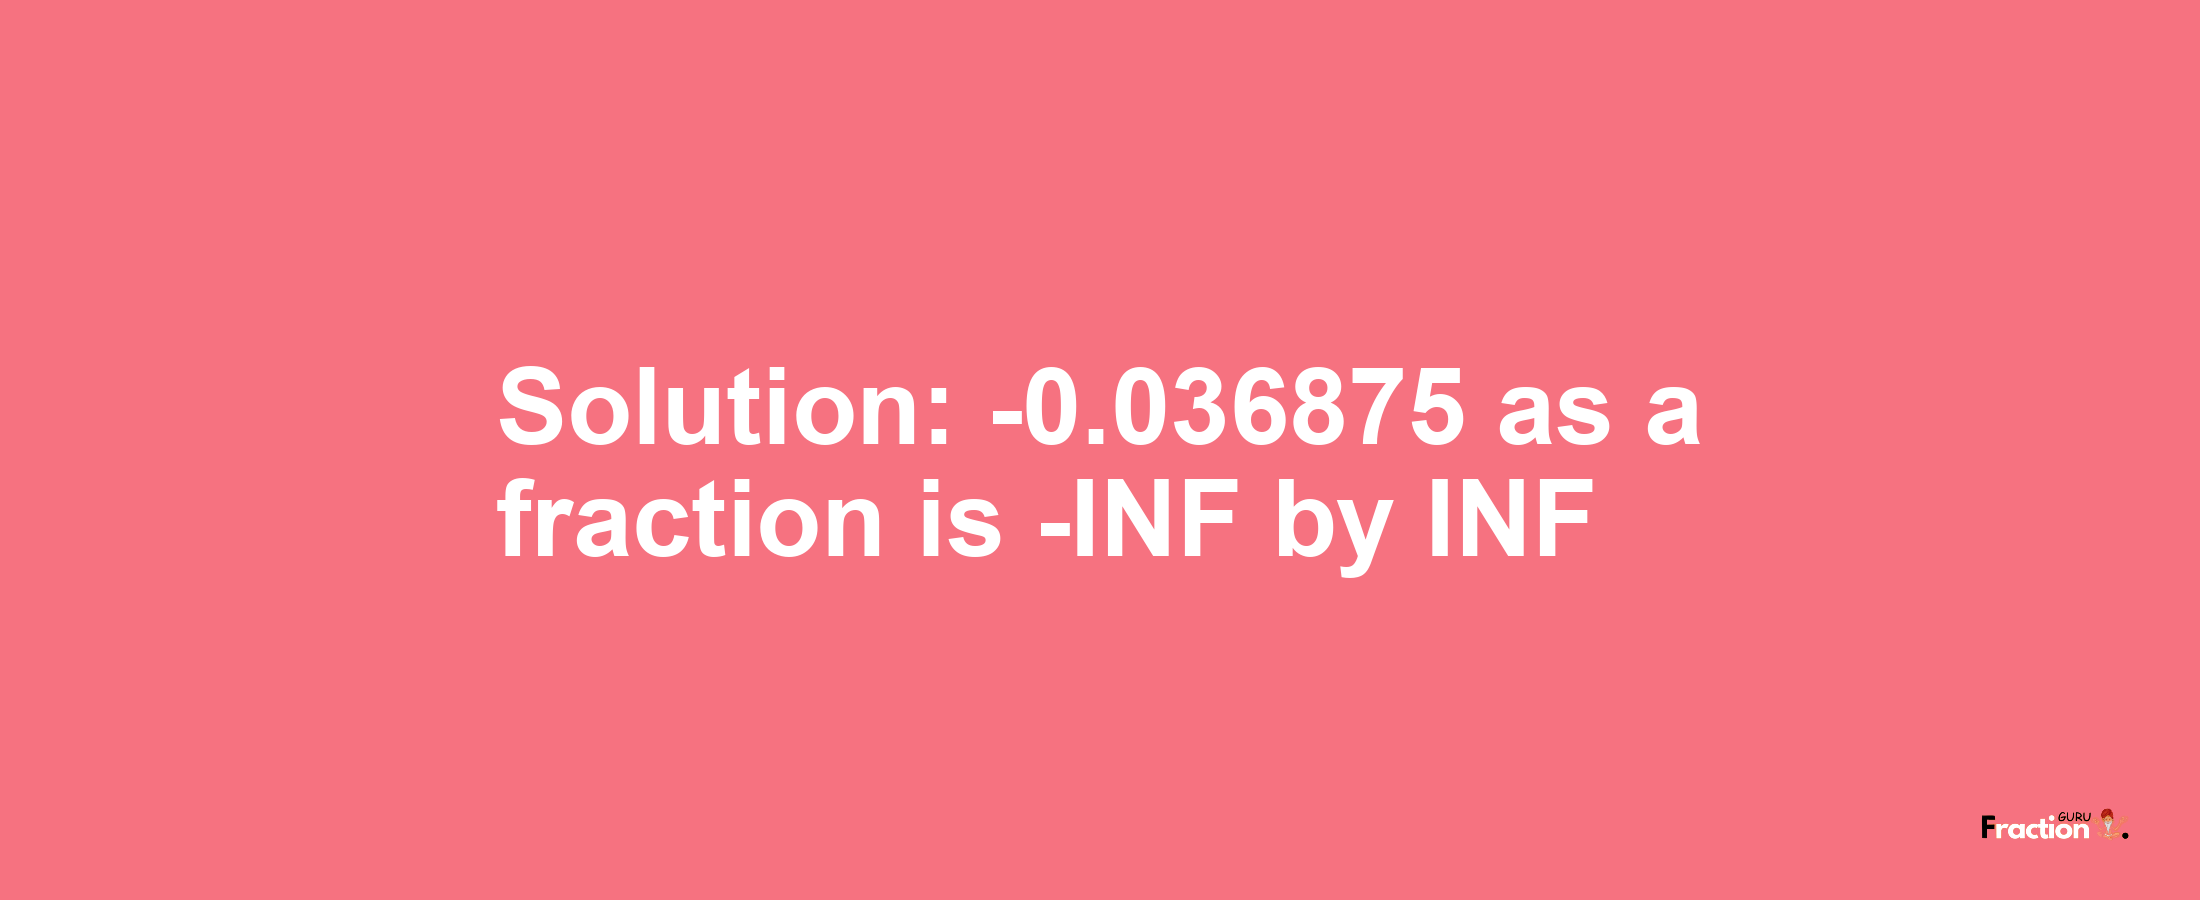 Solution:-0.036875 as a fraction is -INF/INF